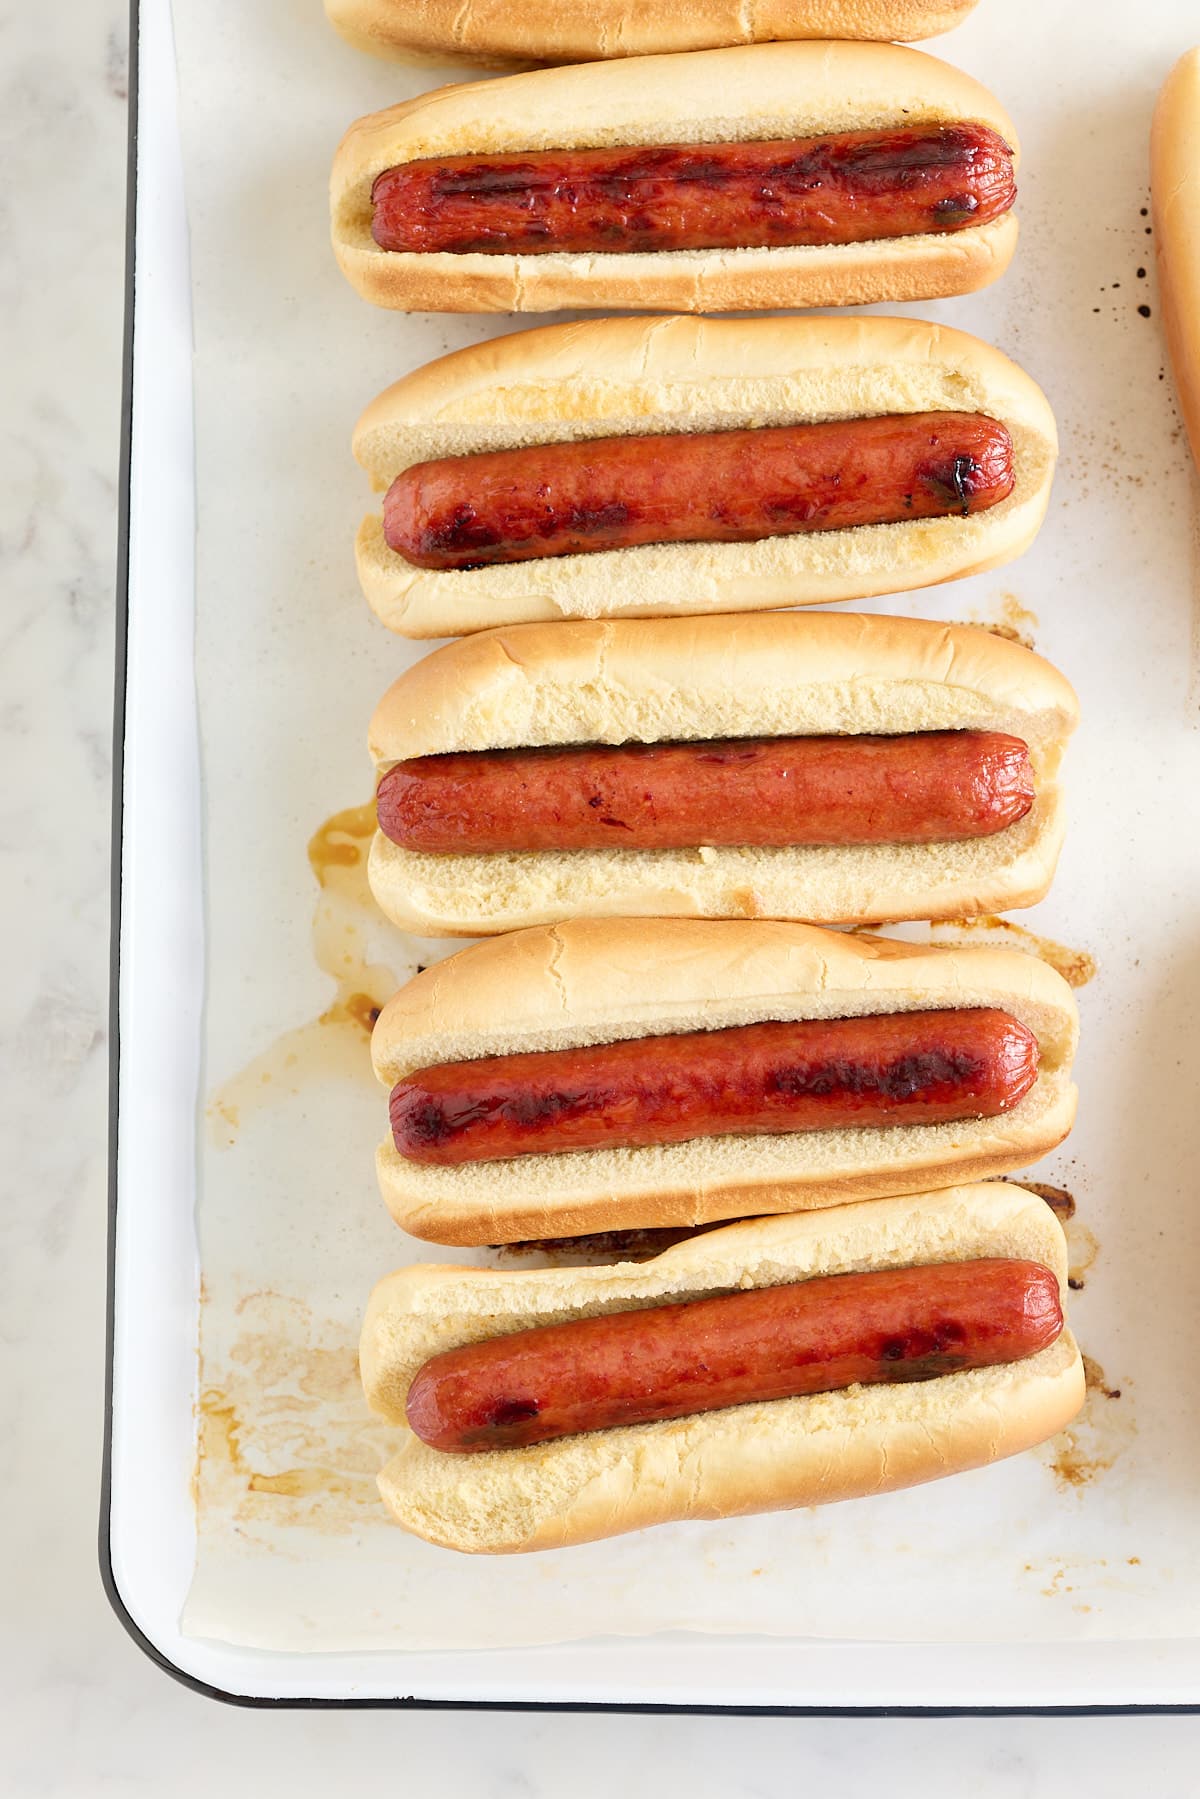 white baking tray with oven baked dogs in hot dog buns